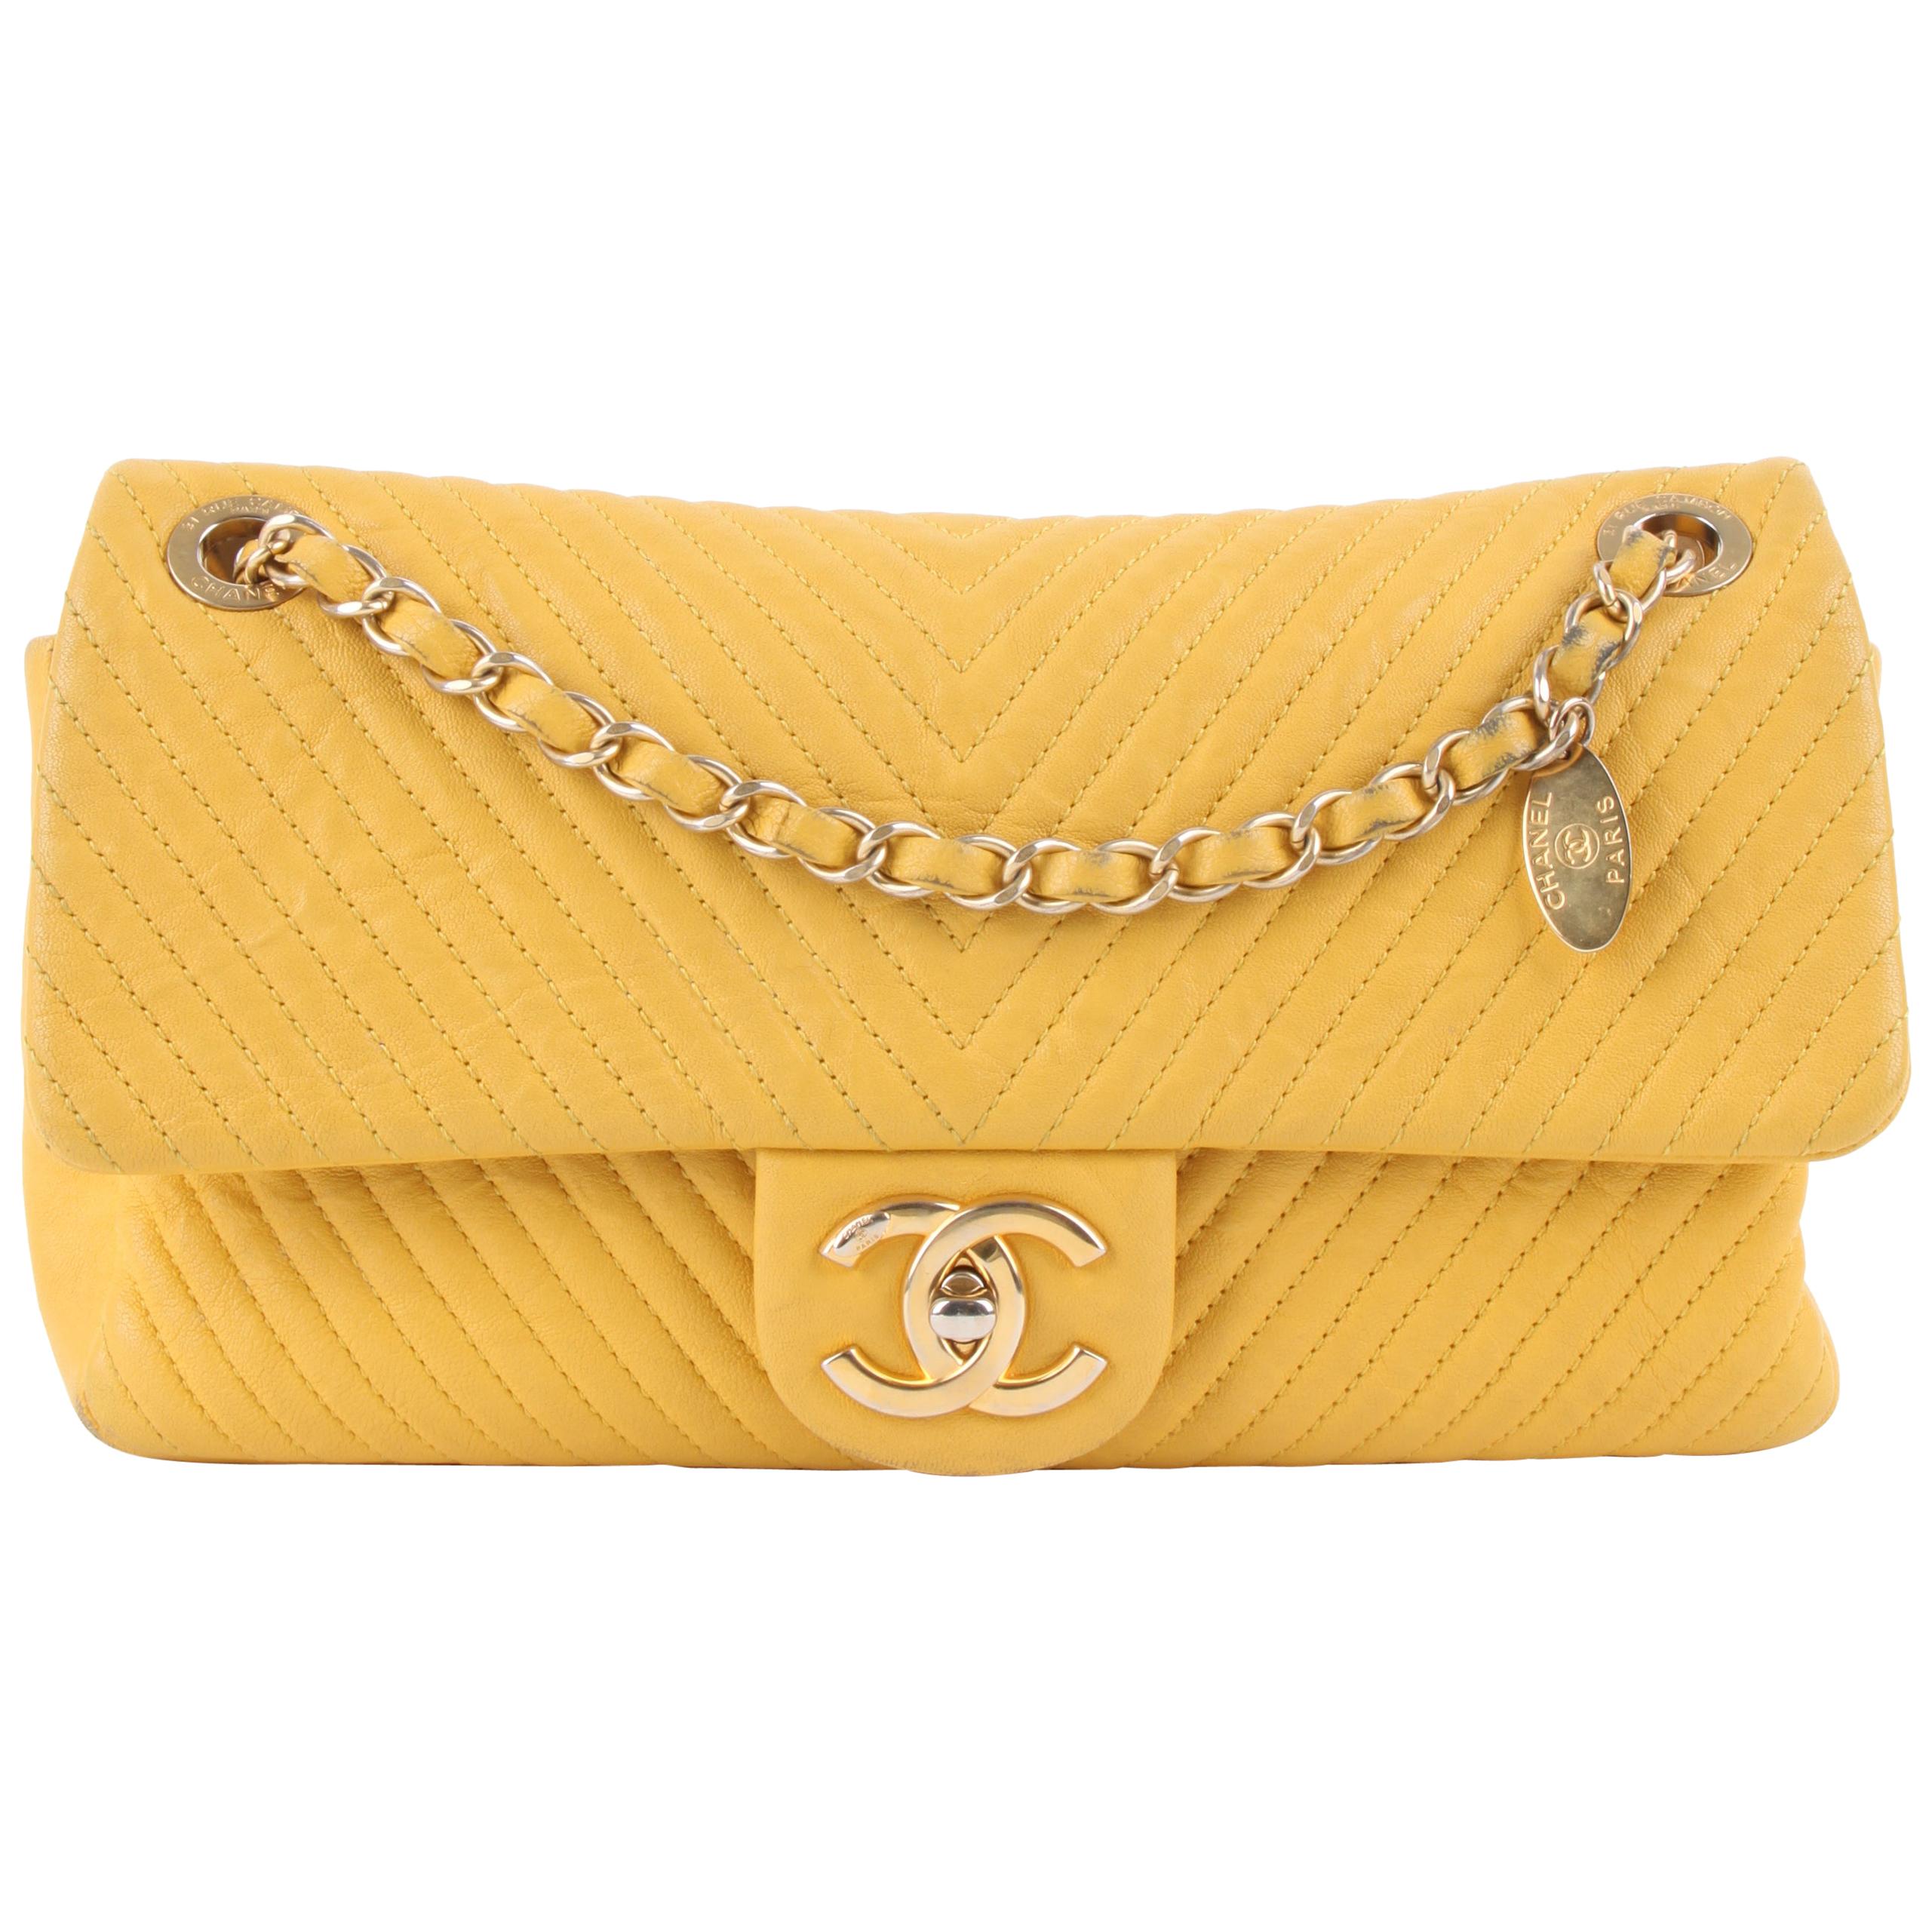 Chanel Chevron Quilted Rectangular Flap Bag - yellow